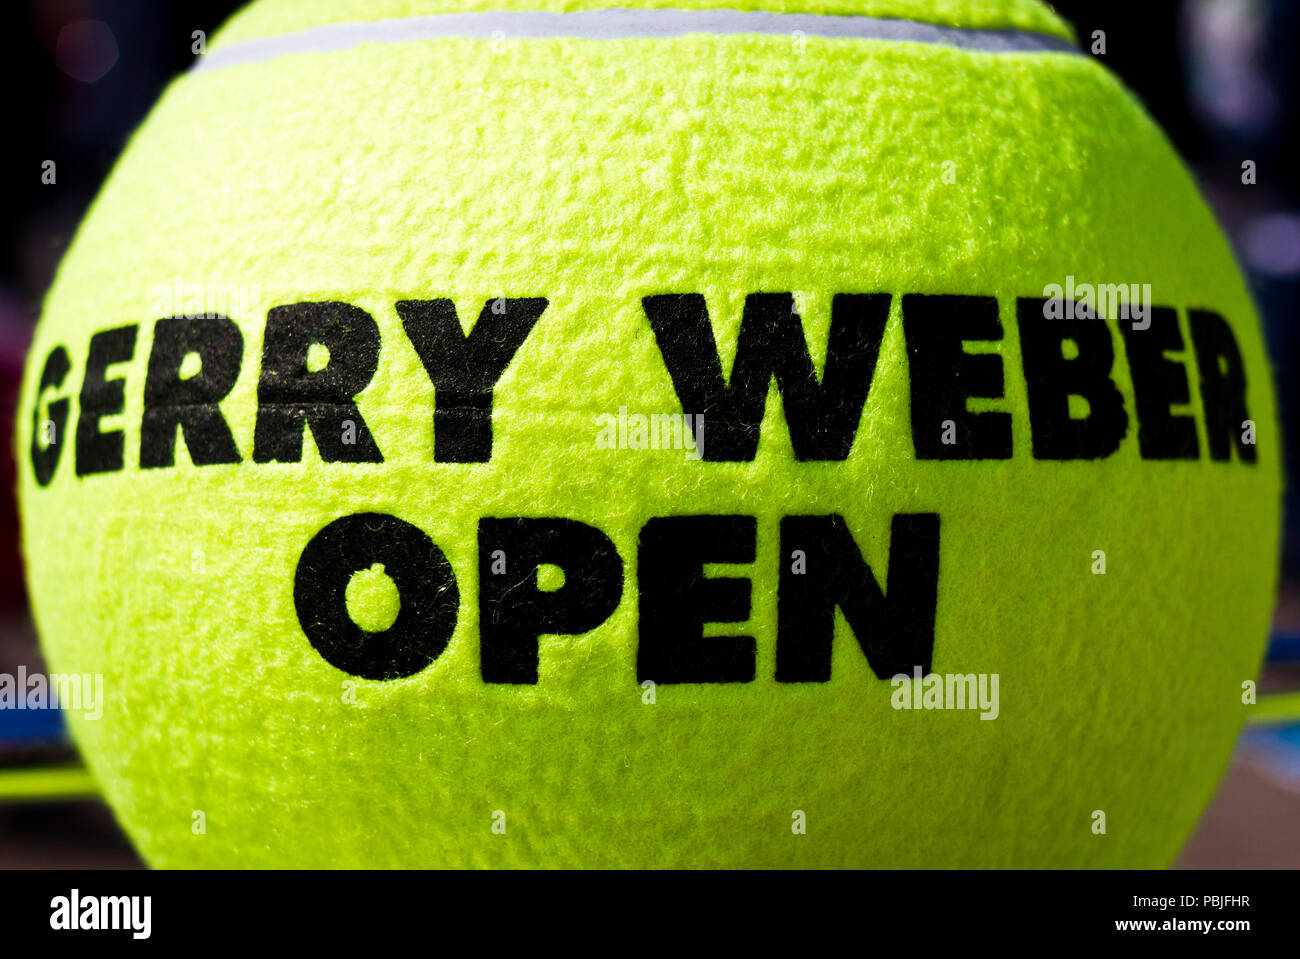 An oversized tennis ball advertising the Gerry Weber Open tennis  championship at a merchandise stall in Halle (Westfalen), Germany Stock  Photo - Alamy